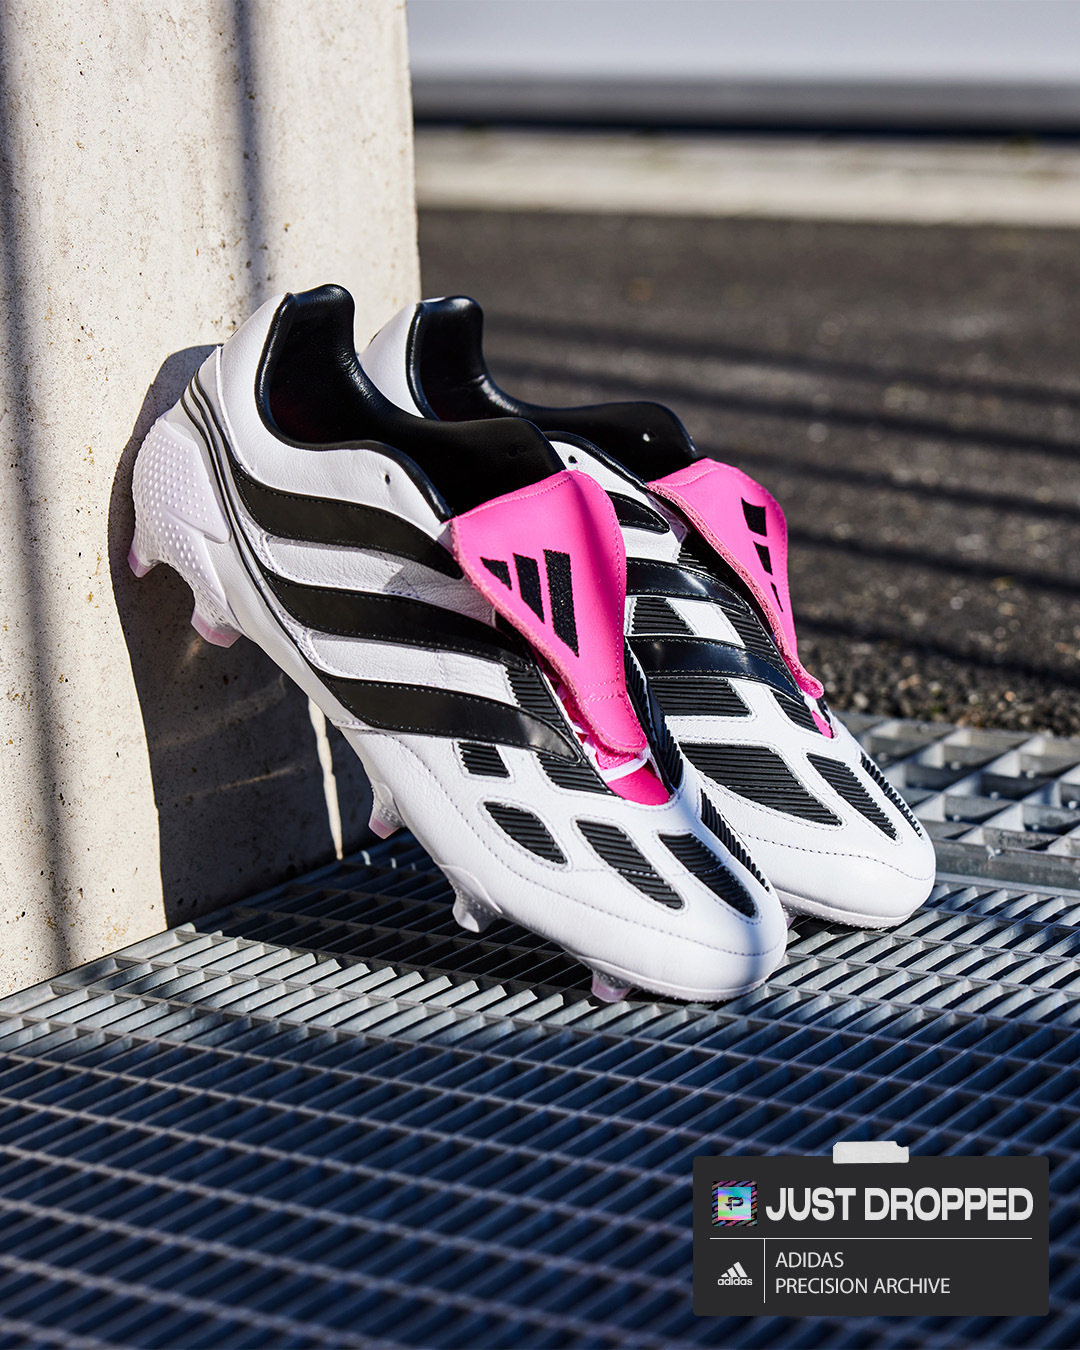 Pro:Direct Soccer on Twitter: dropped: adidas Predator Precision Archive 🤩🔥 Available now 🛒 https://t.co/CocycAa1aI https://t.co/gHZVQrxK7Y" / Twitter